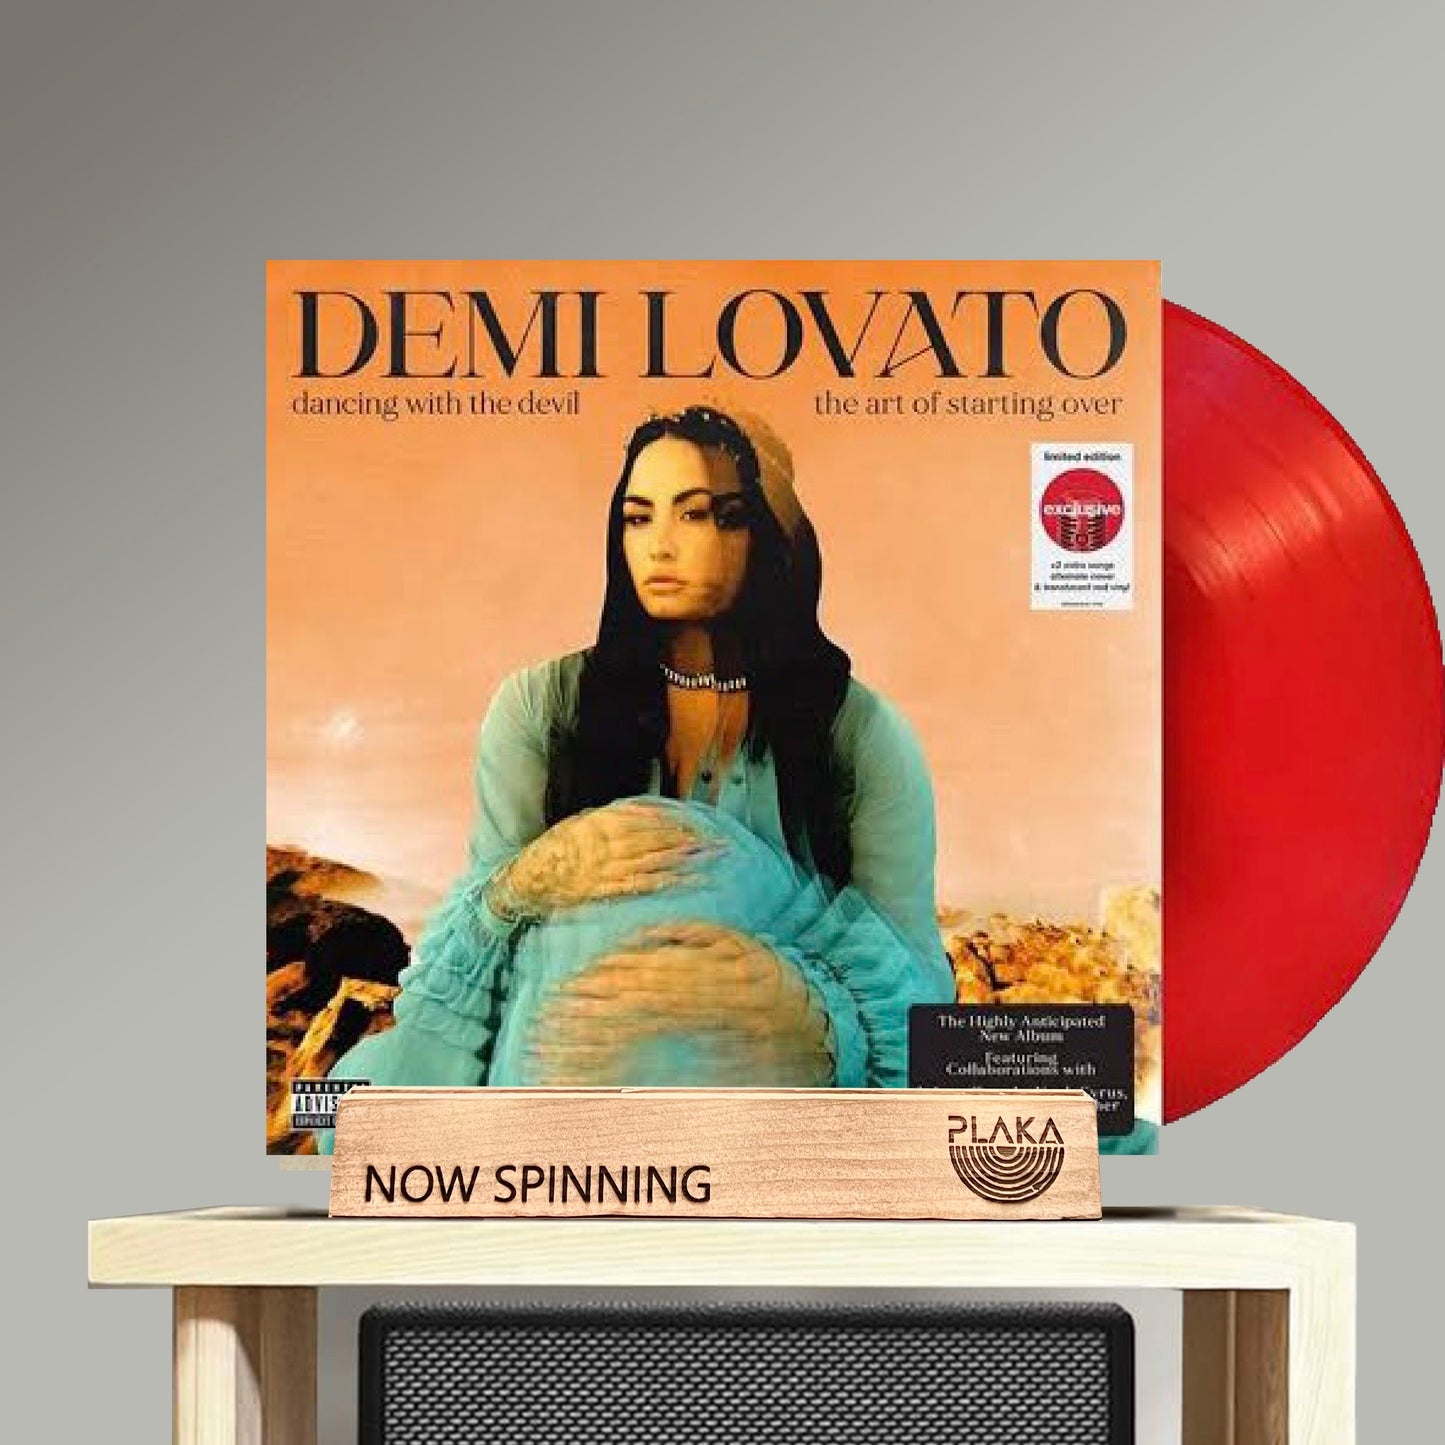 Demi Lovato - Dancing with the Devil.. The Art of Starting Over.